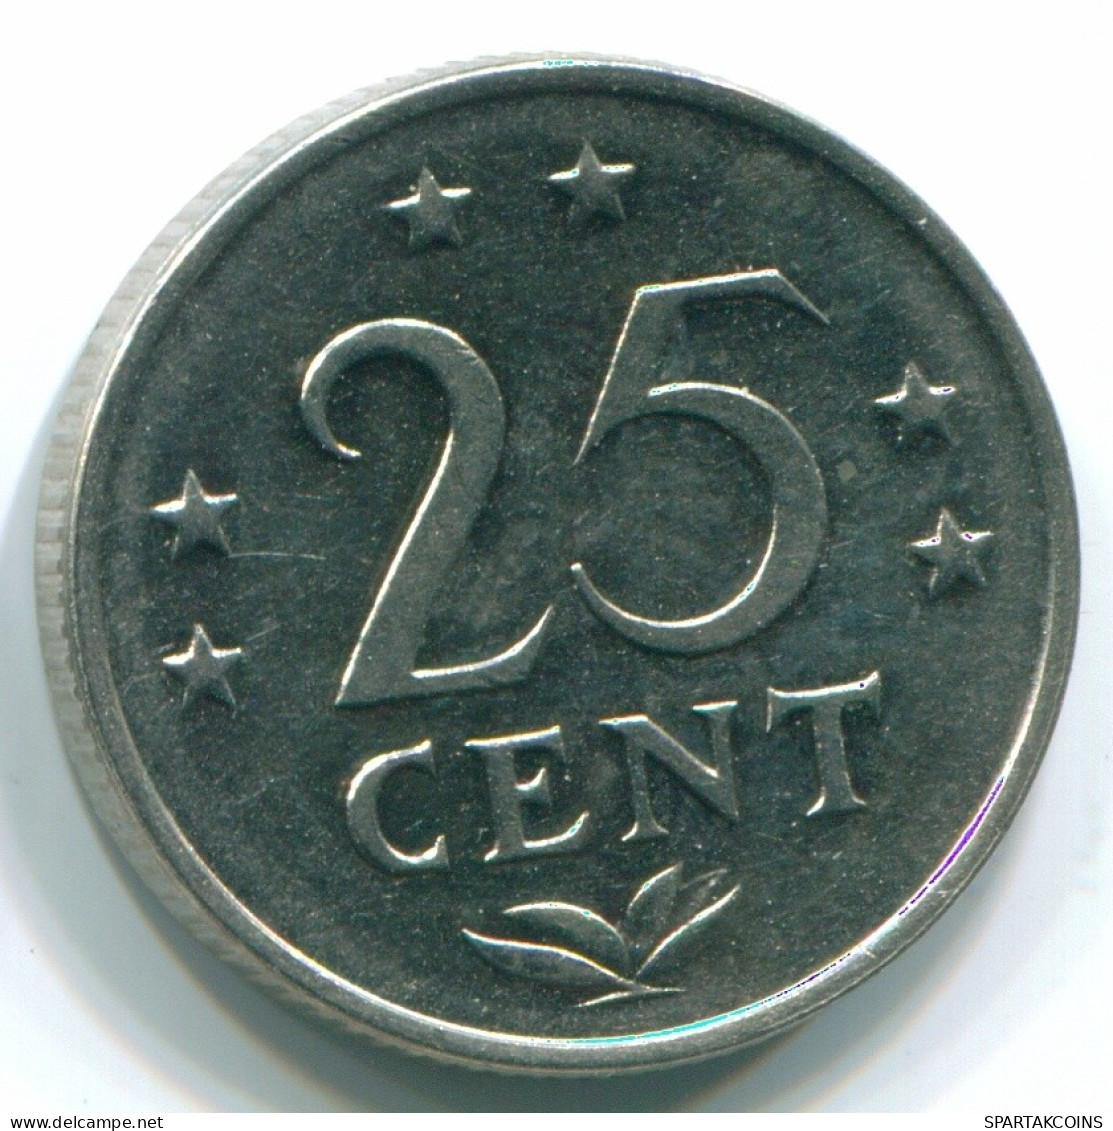 25 CENTS 1971 NETHERLANDS ANTILLES Nickel Colonial Coin #S11482.U.A - Netherlands Antilles